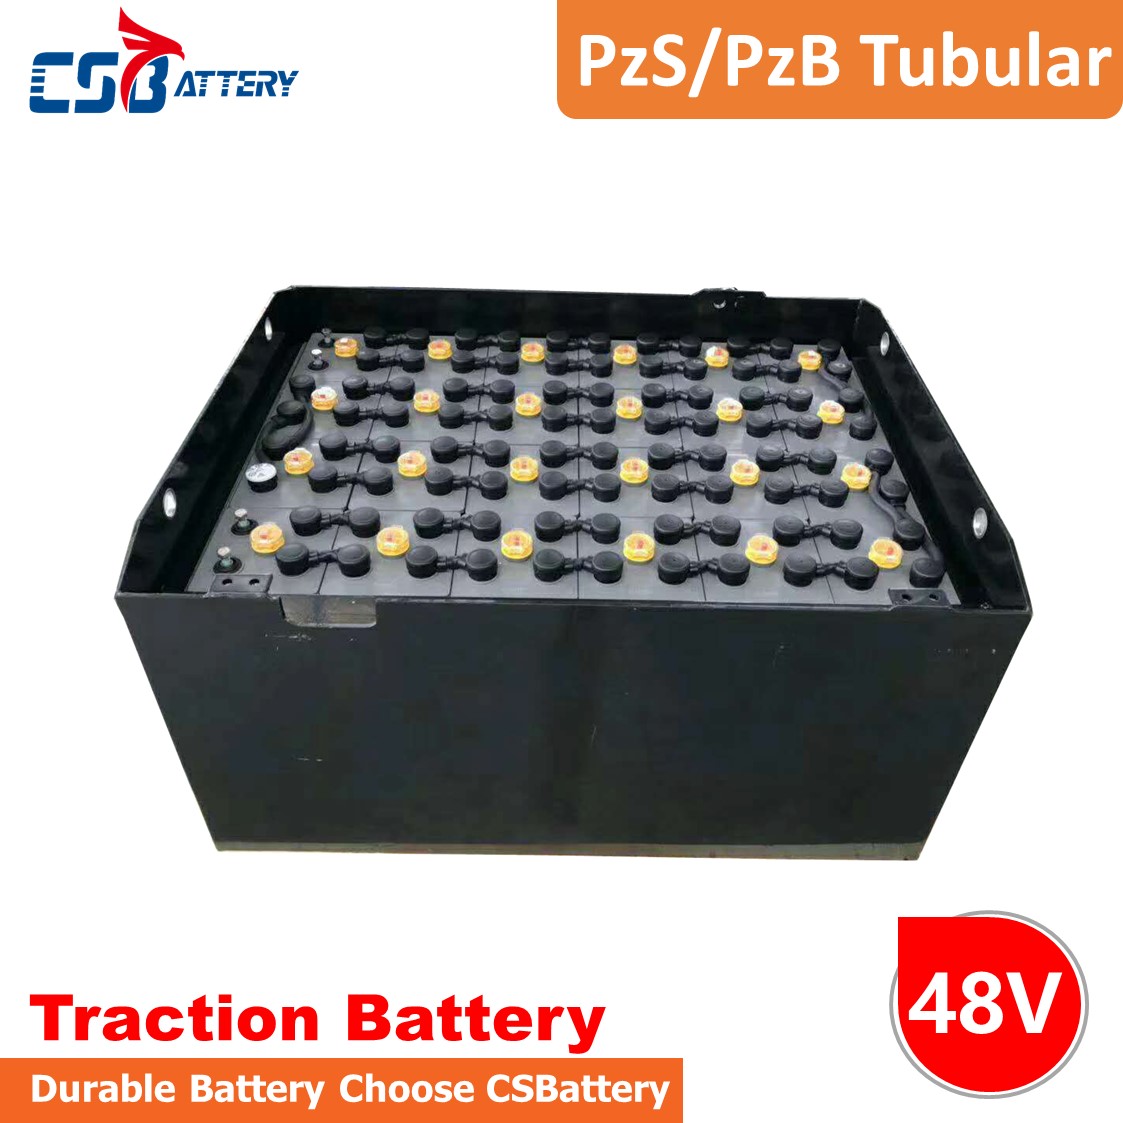 Durable Traction/Forklift Batteries